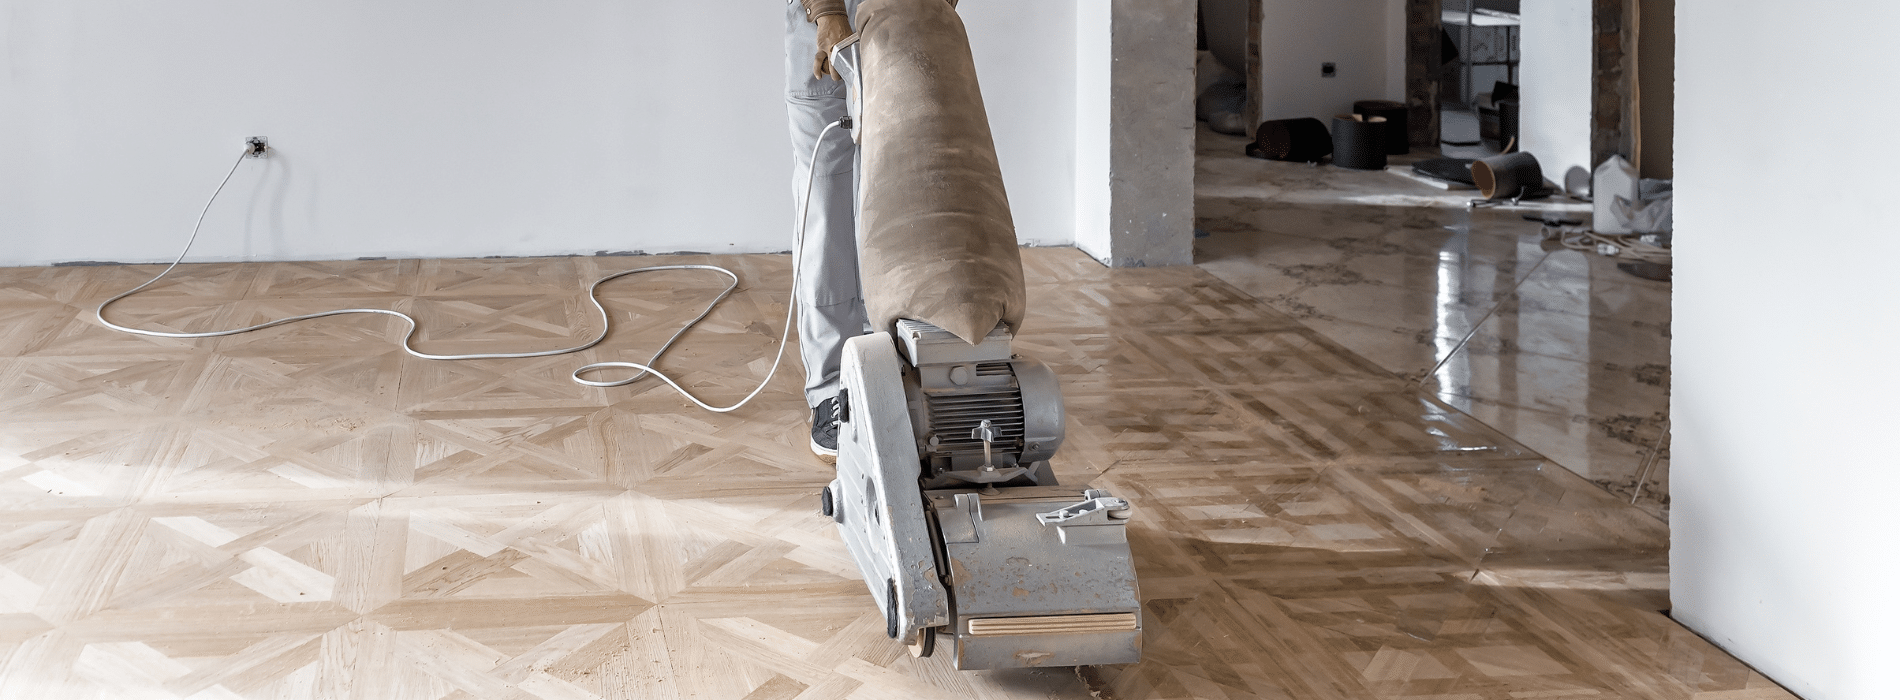 Professional using Bona belt sander and HEPA-filtered dust extraction to flawlessly sand a 350x750mm herringbone floor. The Effect 2200 (Voltage: 230, Frequency: 60-70) ensures efficient sanding. Image showcases a perfectly transformed and precision-finished floor.